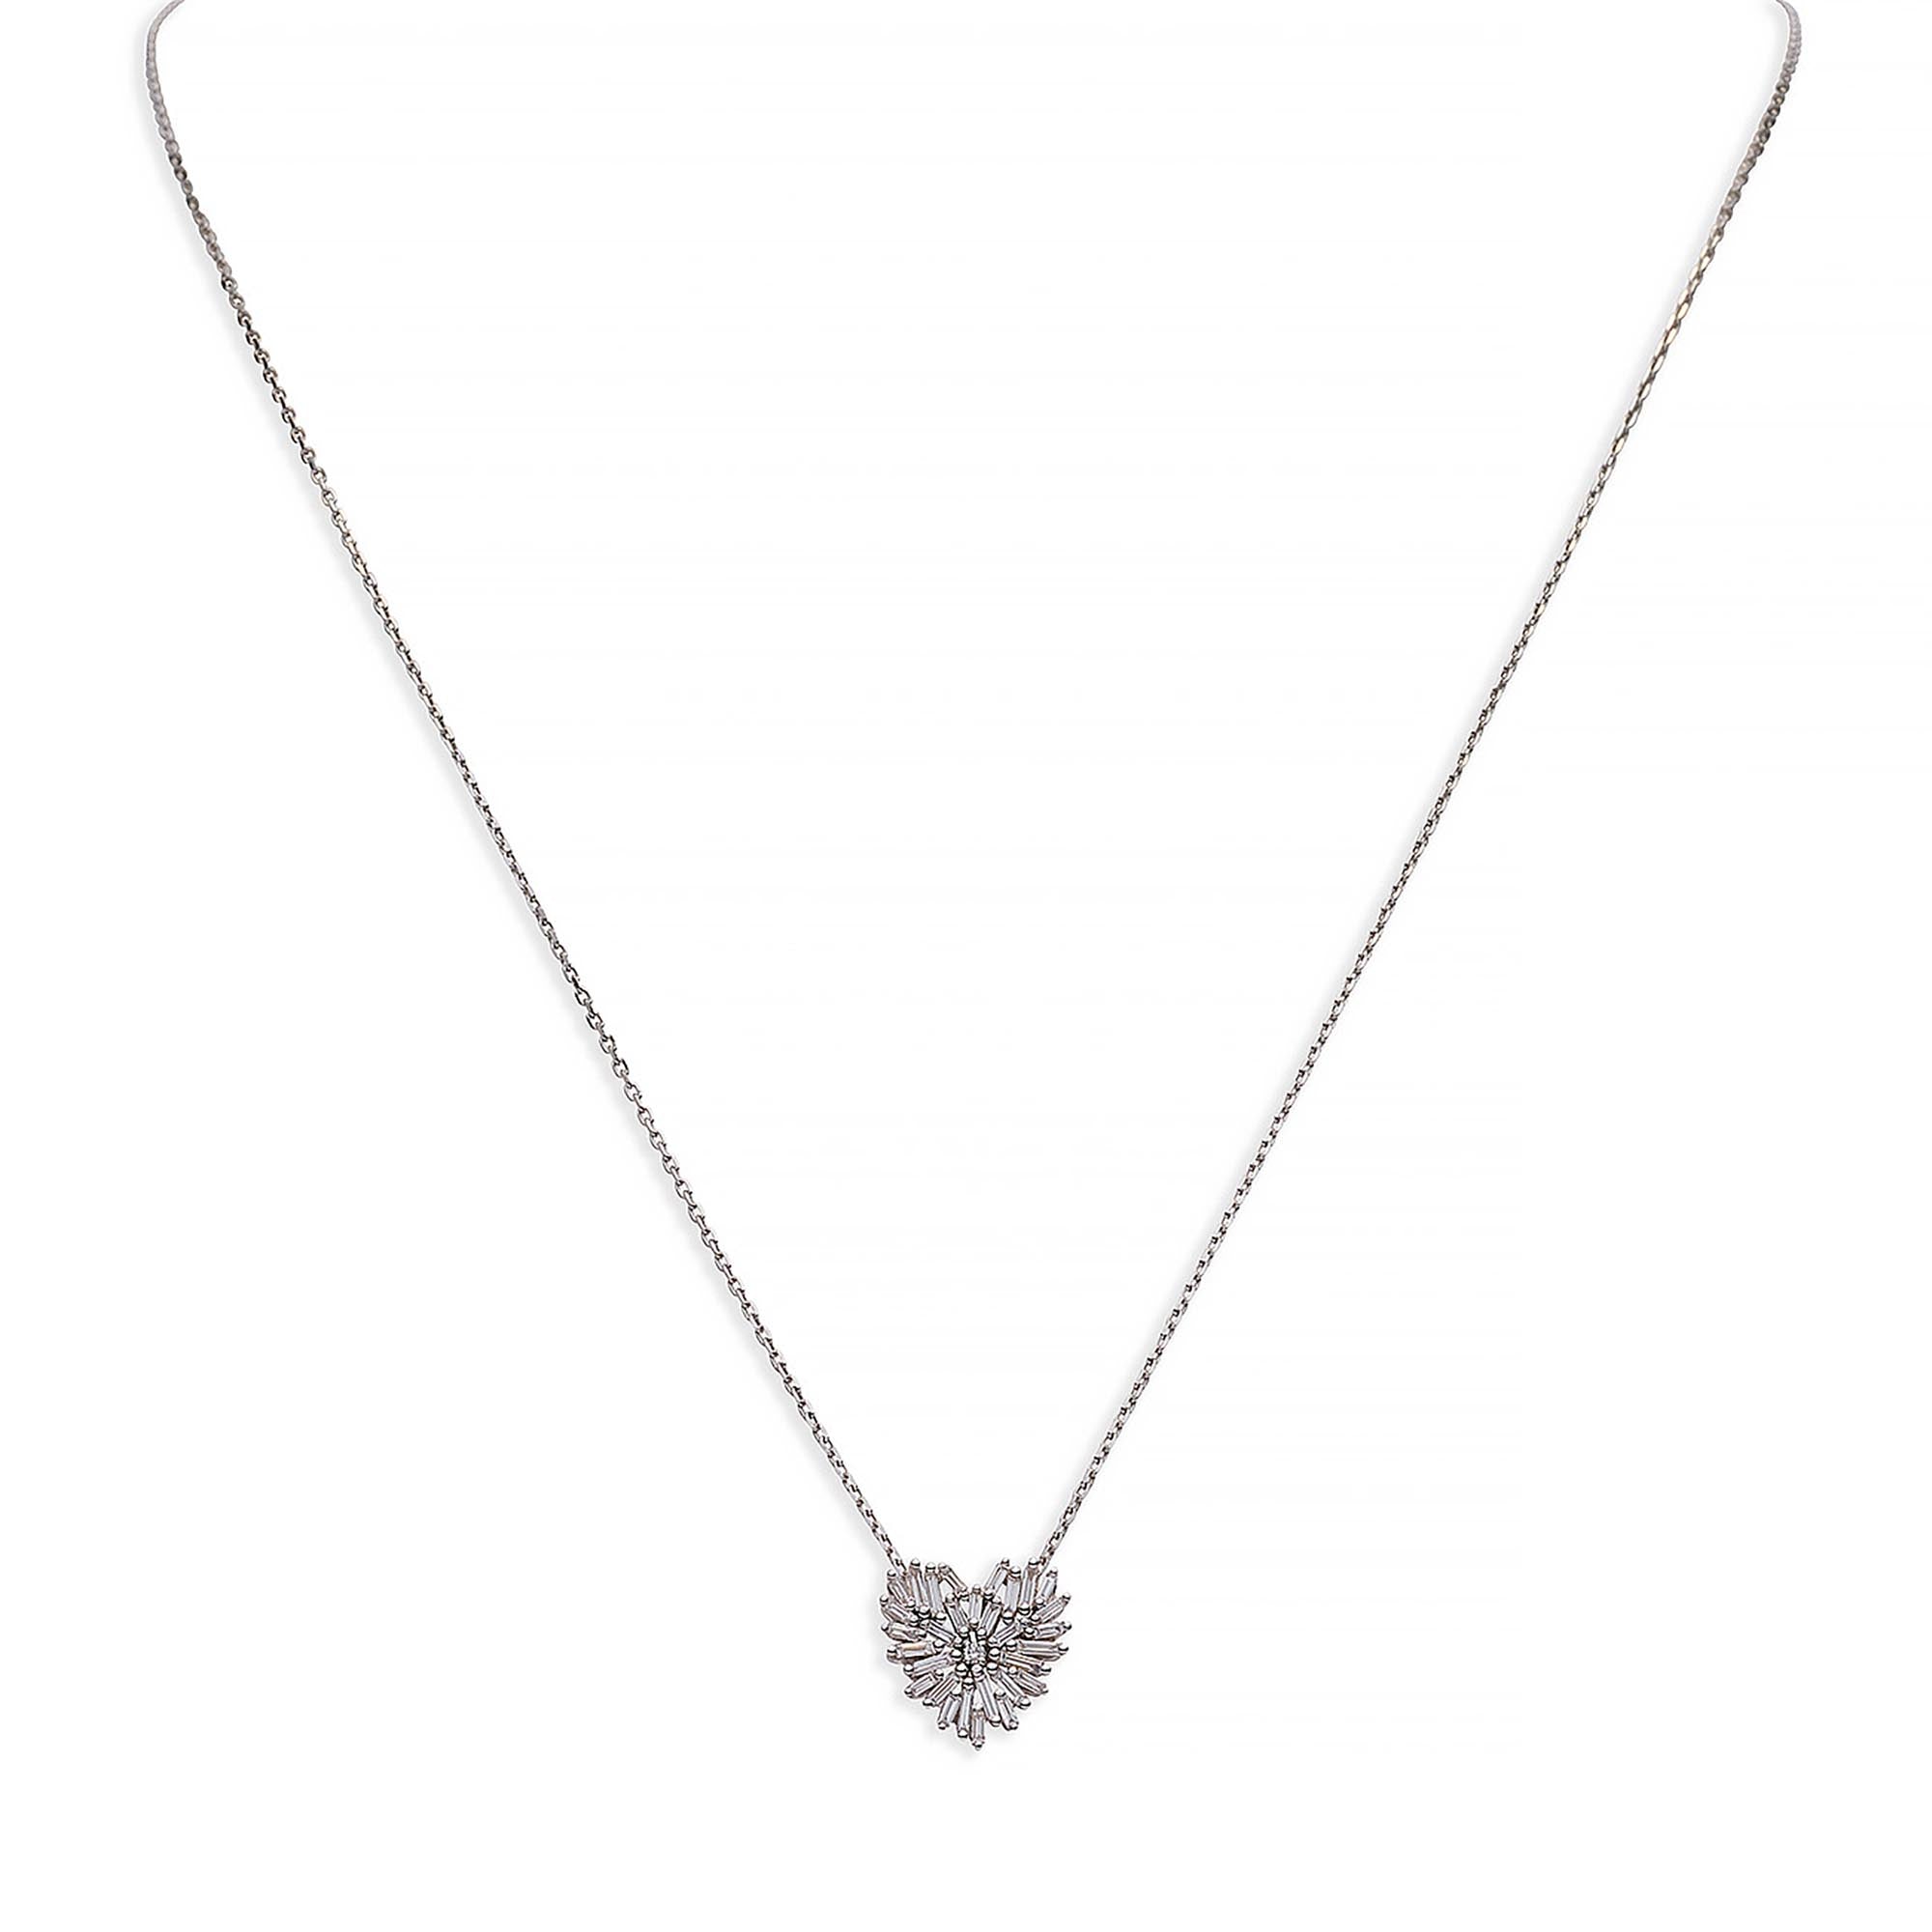 Buy Heart-Shaped Blue Stone Pendant Necklace Plated 925 Silver Diamond  Sapphire at Amazon.in